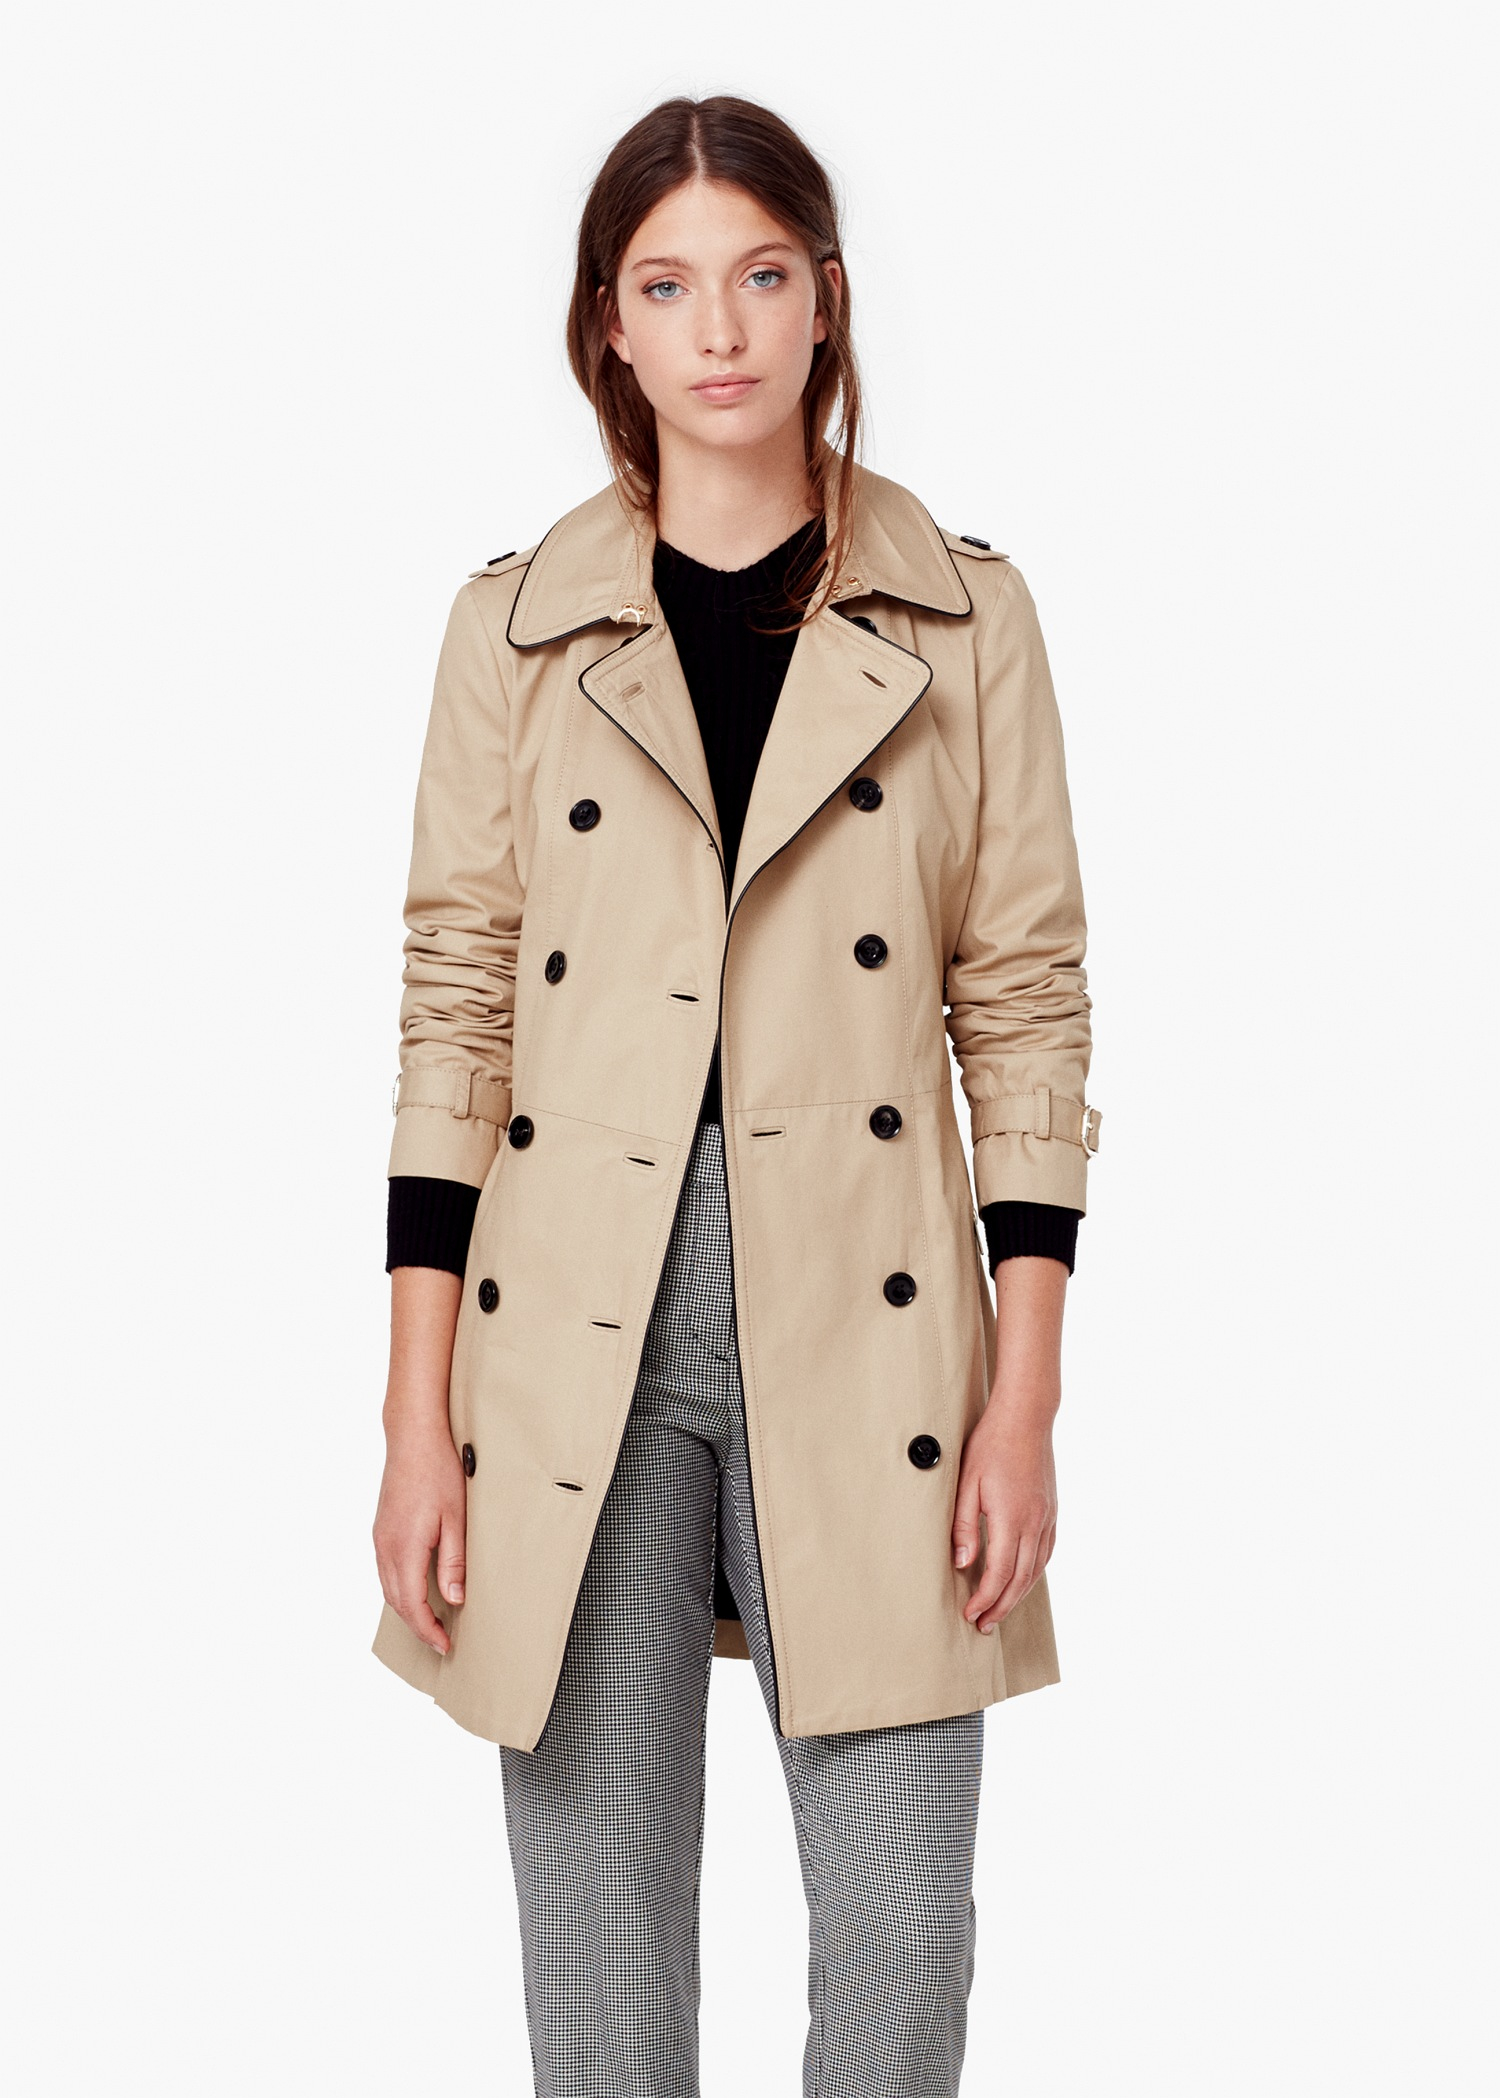 Lyst - Mango Cotton-blend Trench Coat in Natural